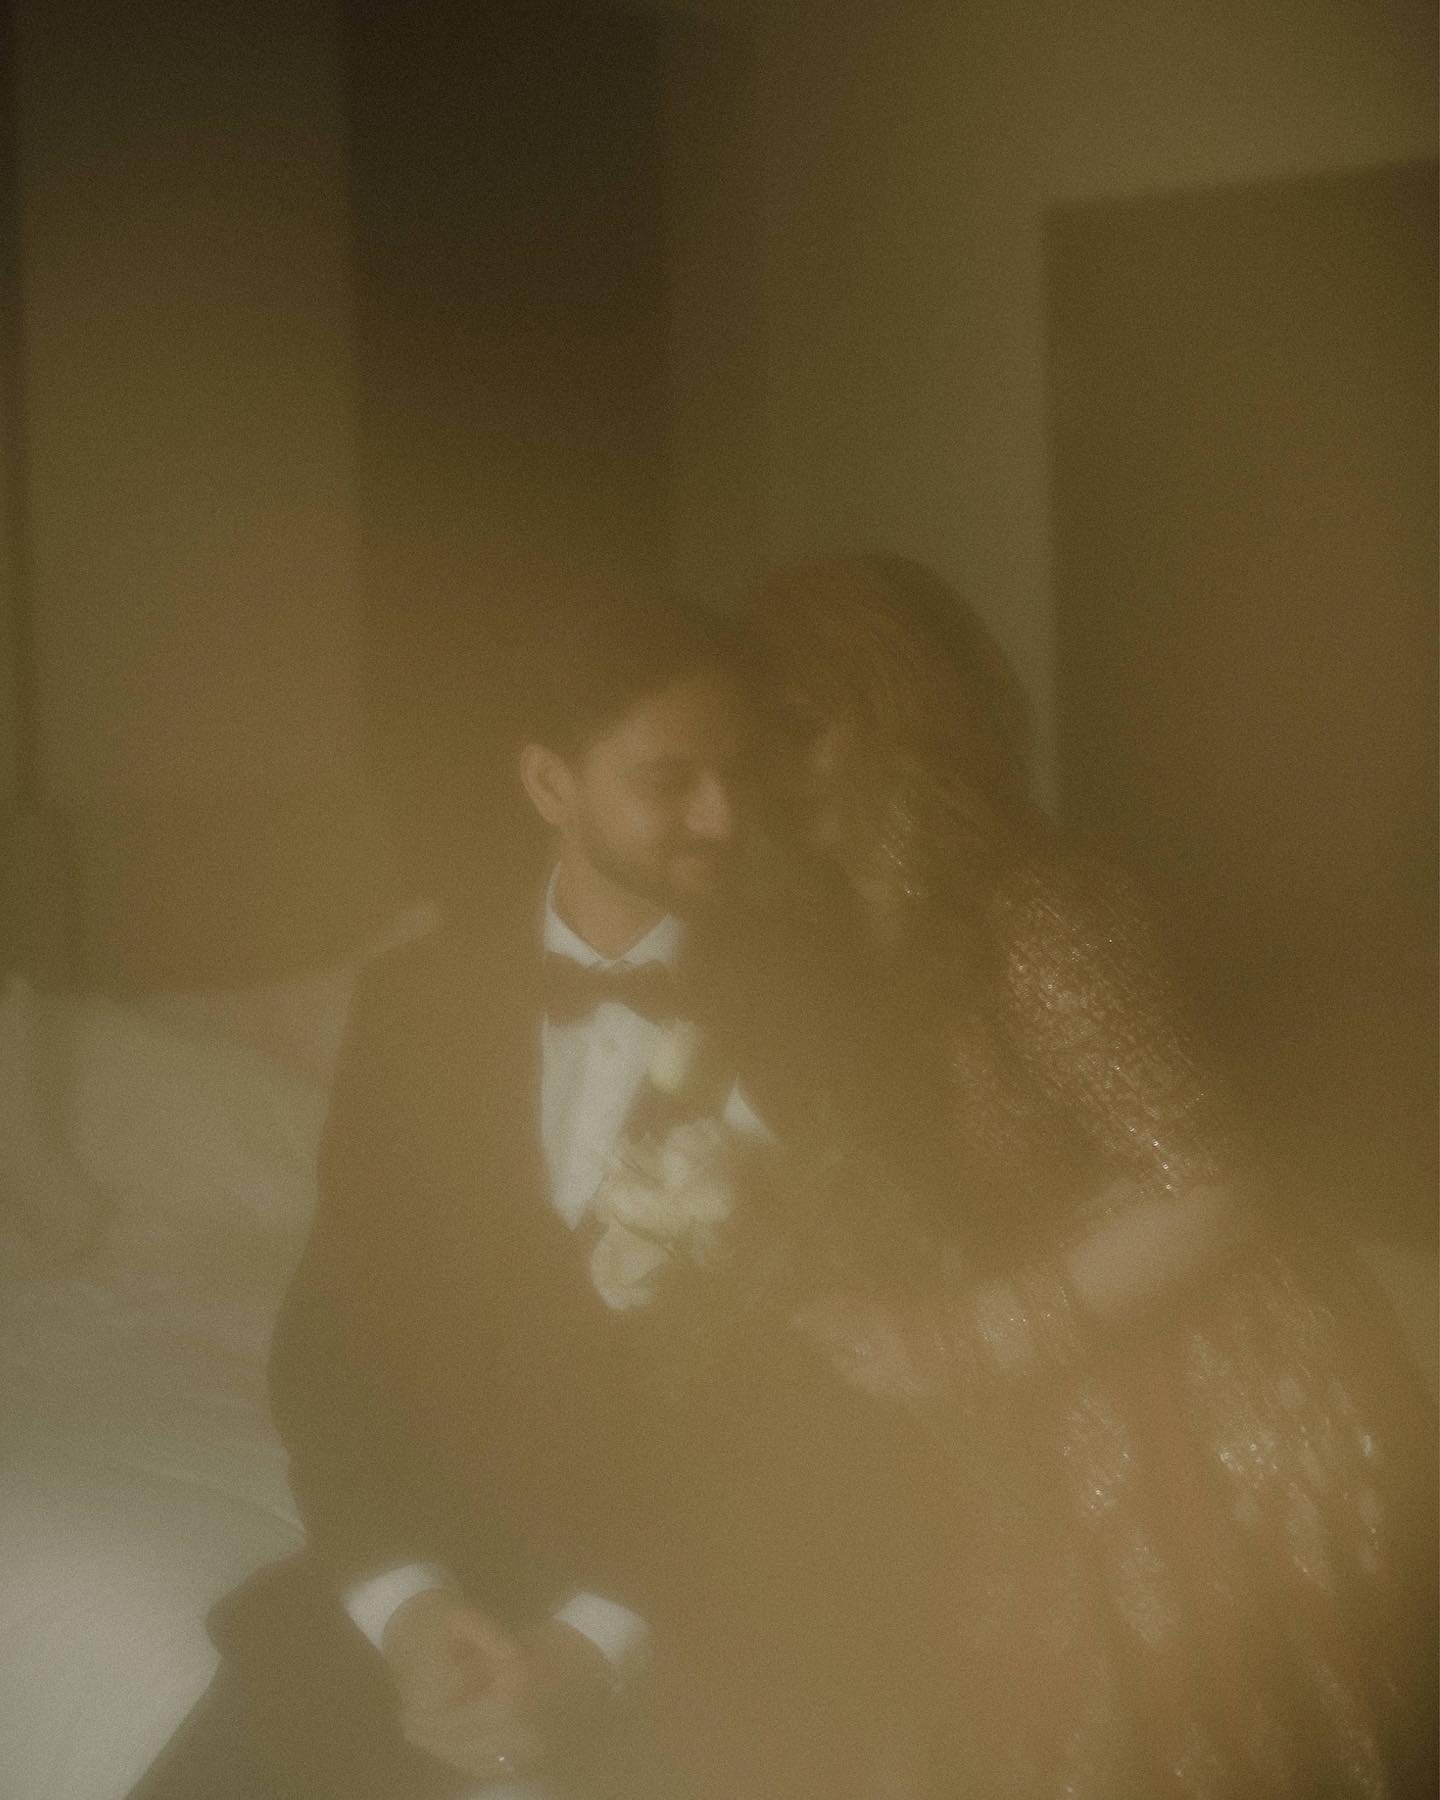 Loved creating these artsy, intimate photos with Manisha and Satveer at their room at @ritzcarlton. I held the curtain up to the lens to get that golden vintage effect ✌️